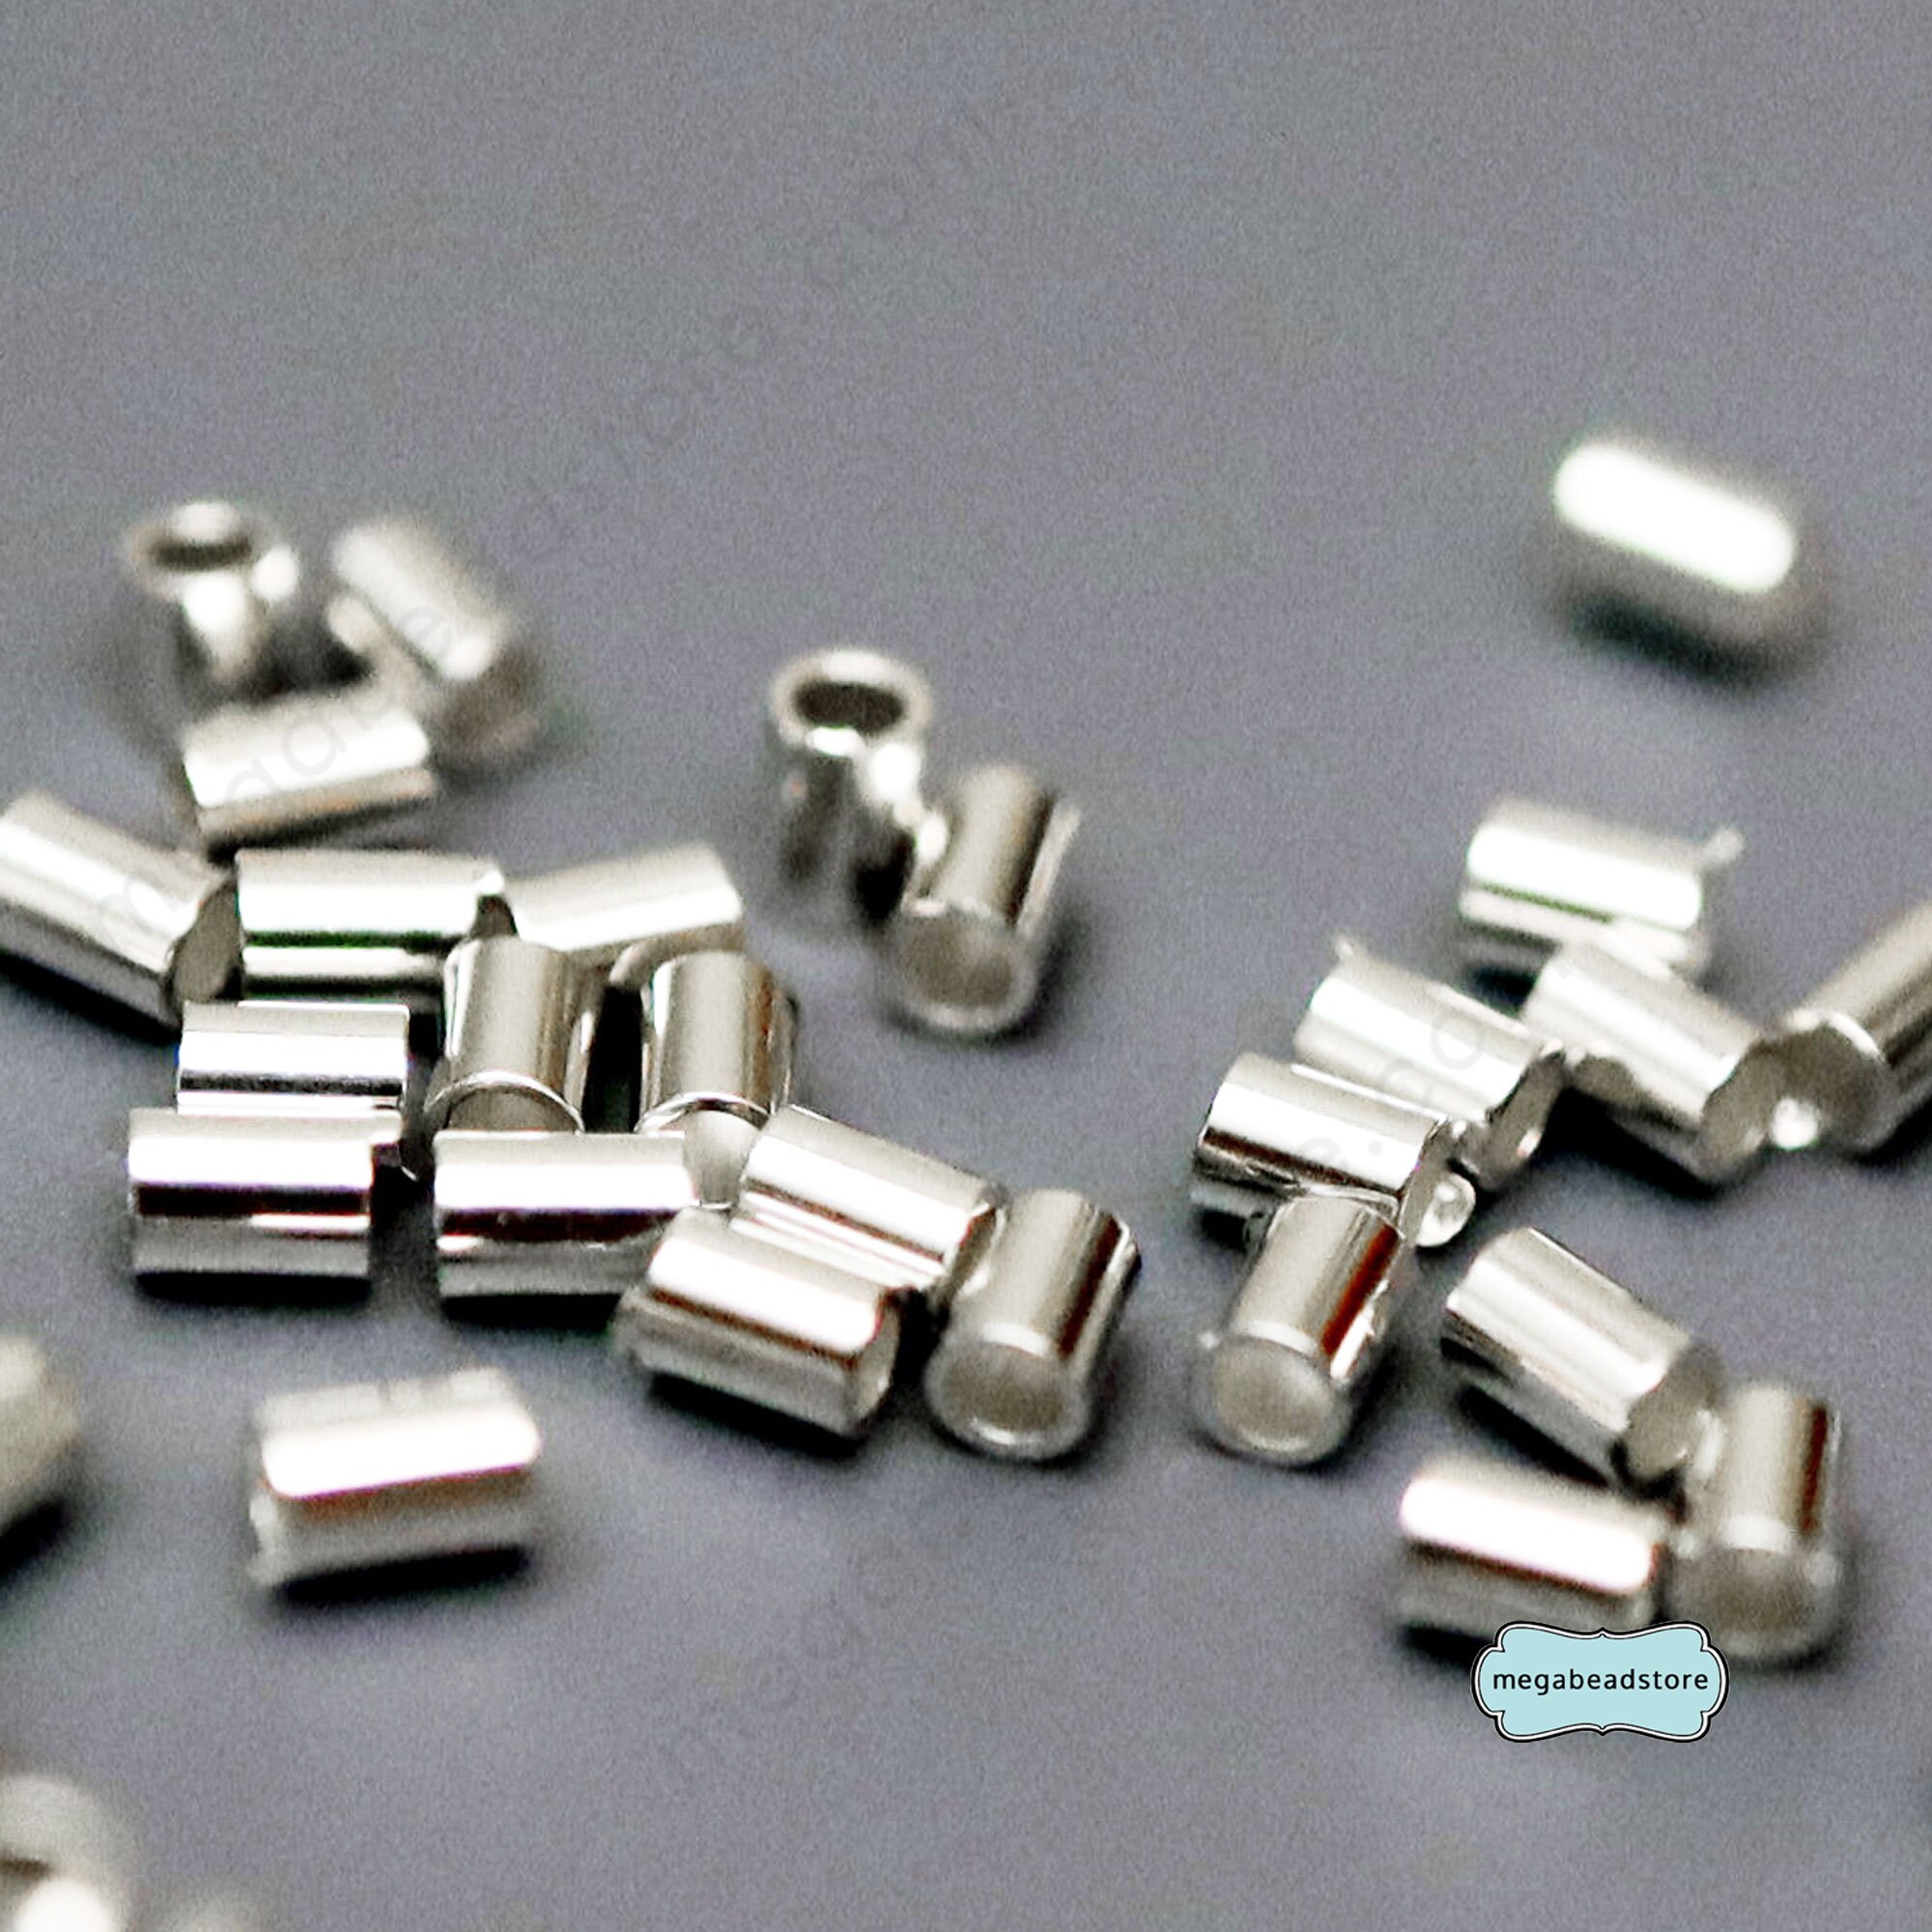 100 Packs Silver Crimp Bead S925 Silver Tube Crimp Beads Stoppers for  Jewelry Making, 2 mm Crimp Tube Spacers, Jewelry Crimping Beads, Silver